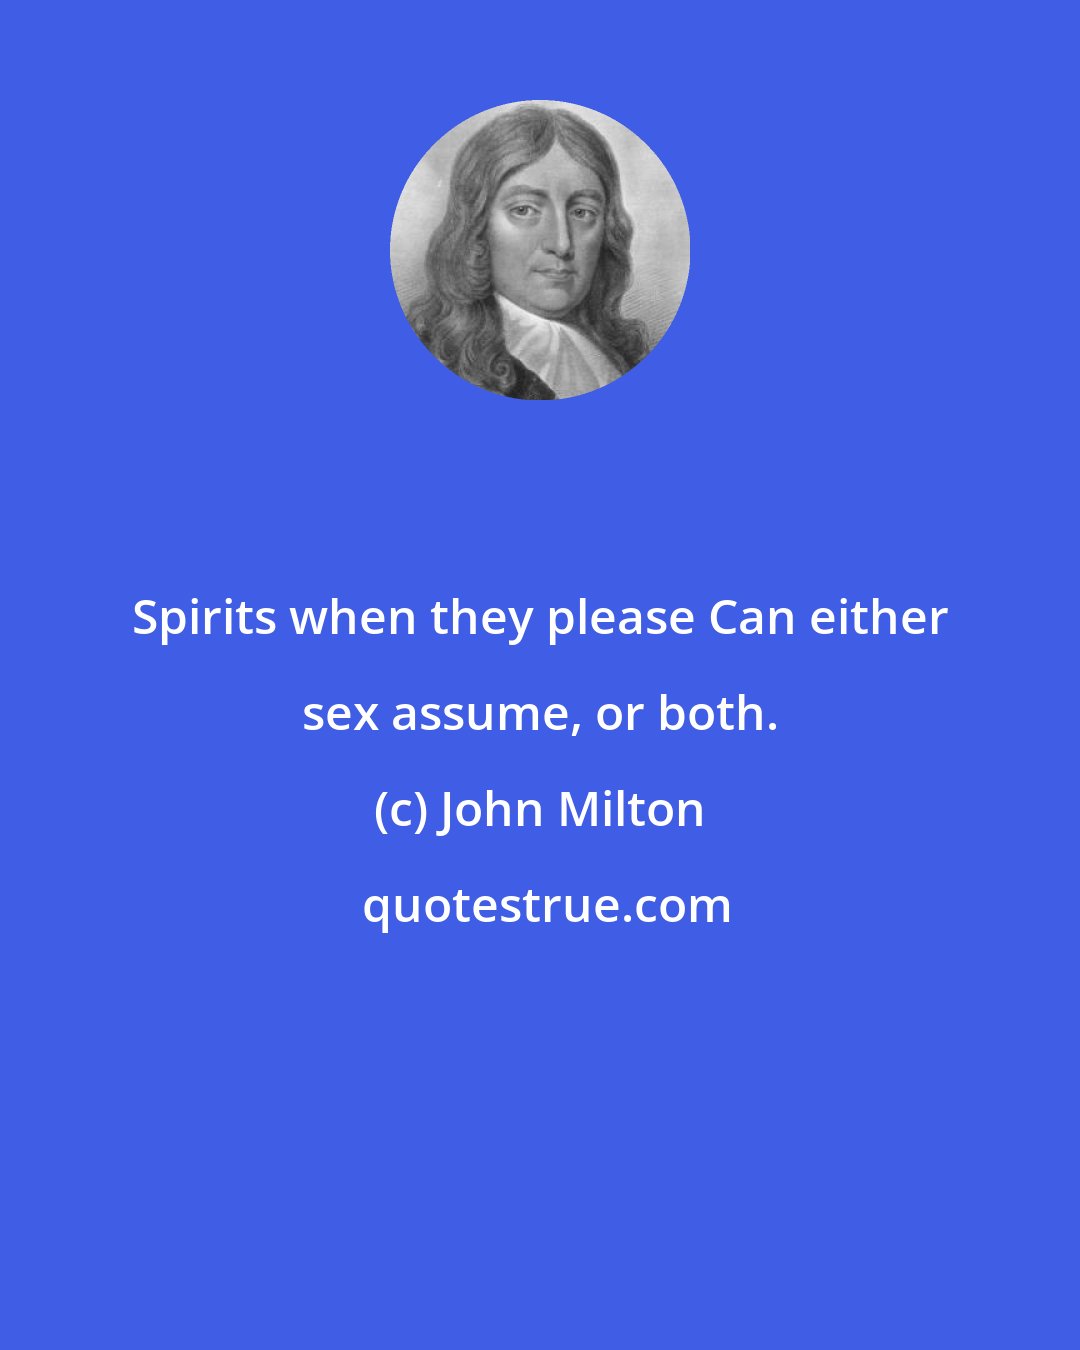 John Milton: Spirits when they please Can either sex assume, or both.